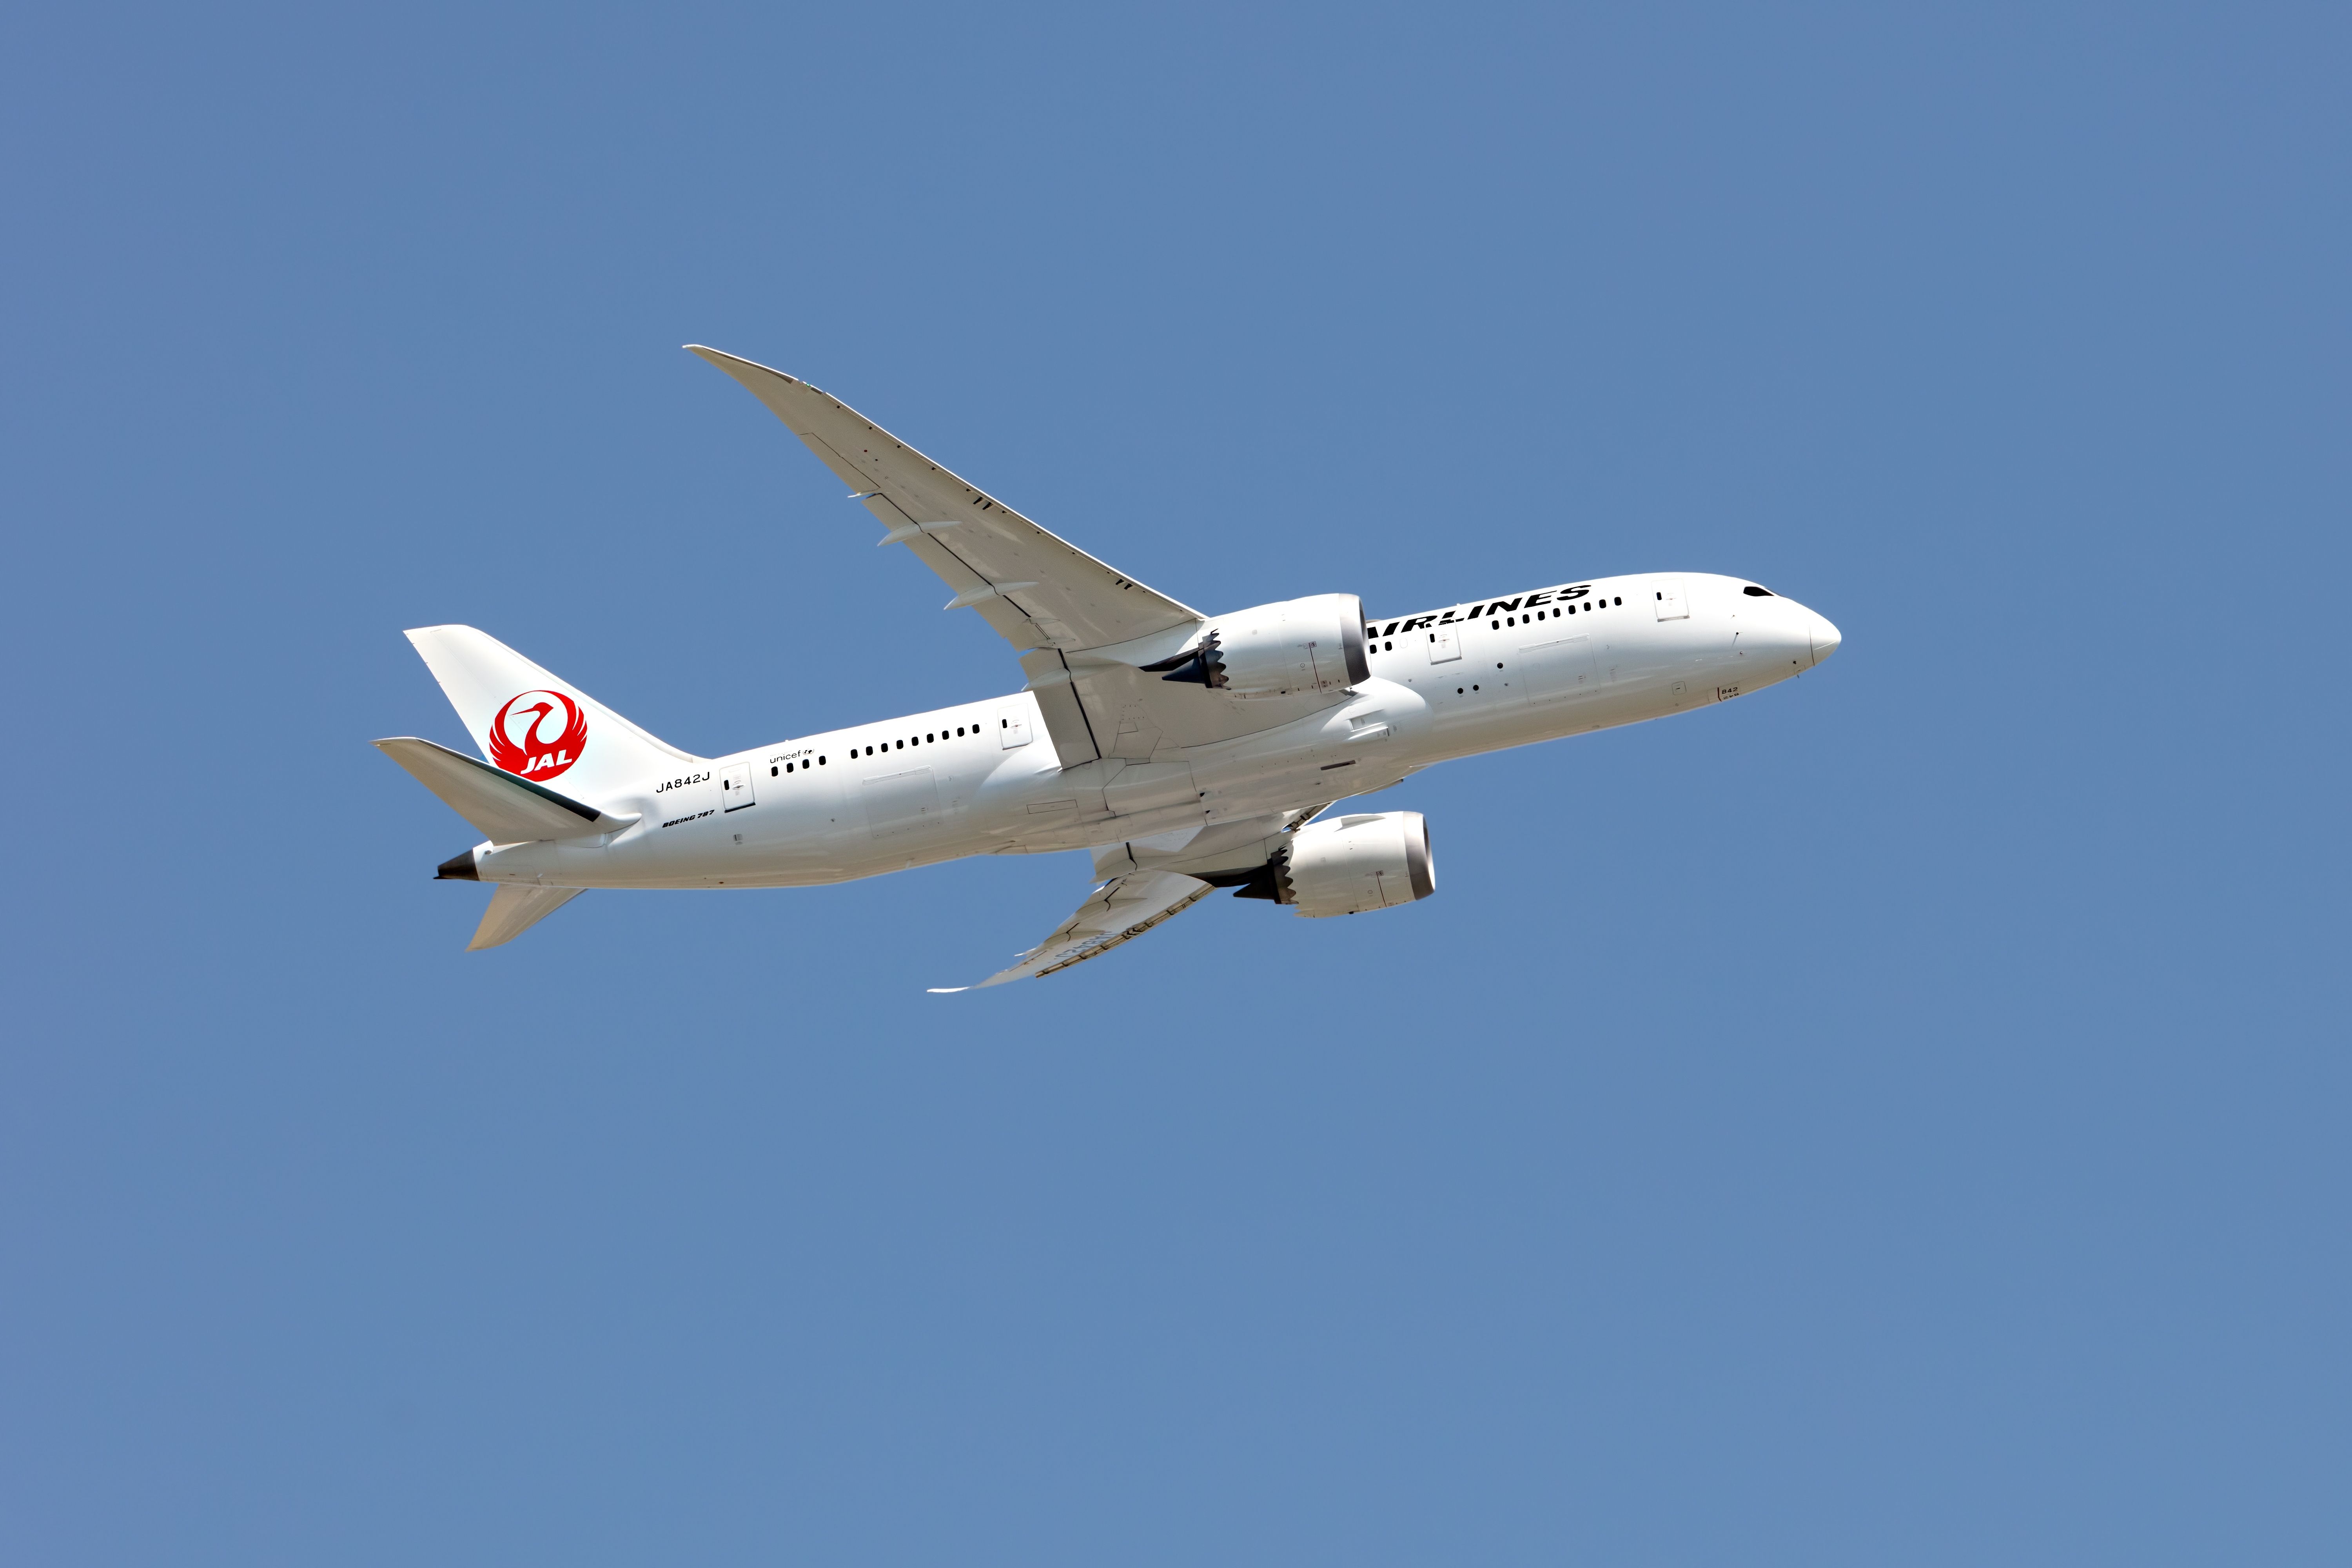 Gone: Japan Airlines Has Operated Its Last Boeing 777-200ER Flight